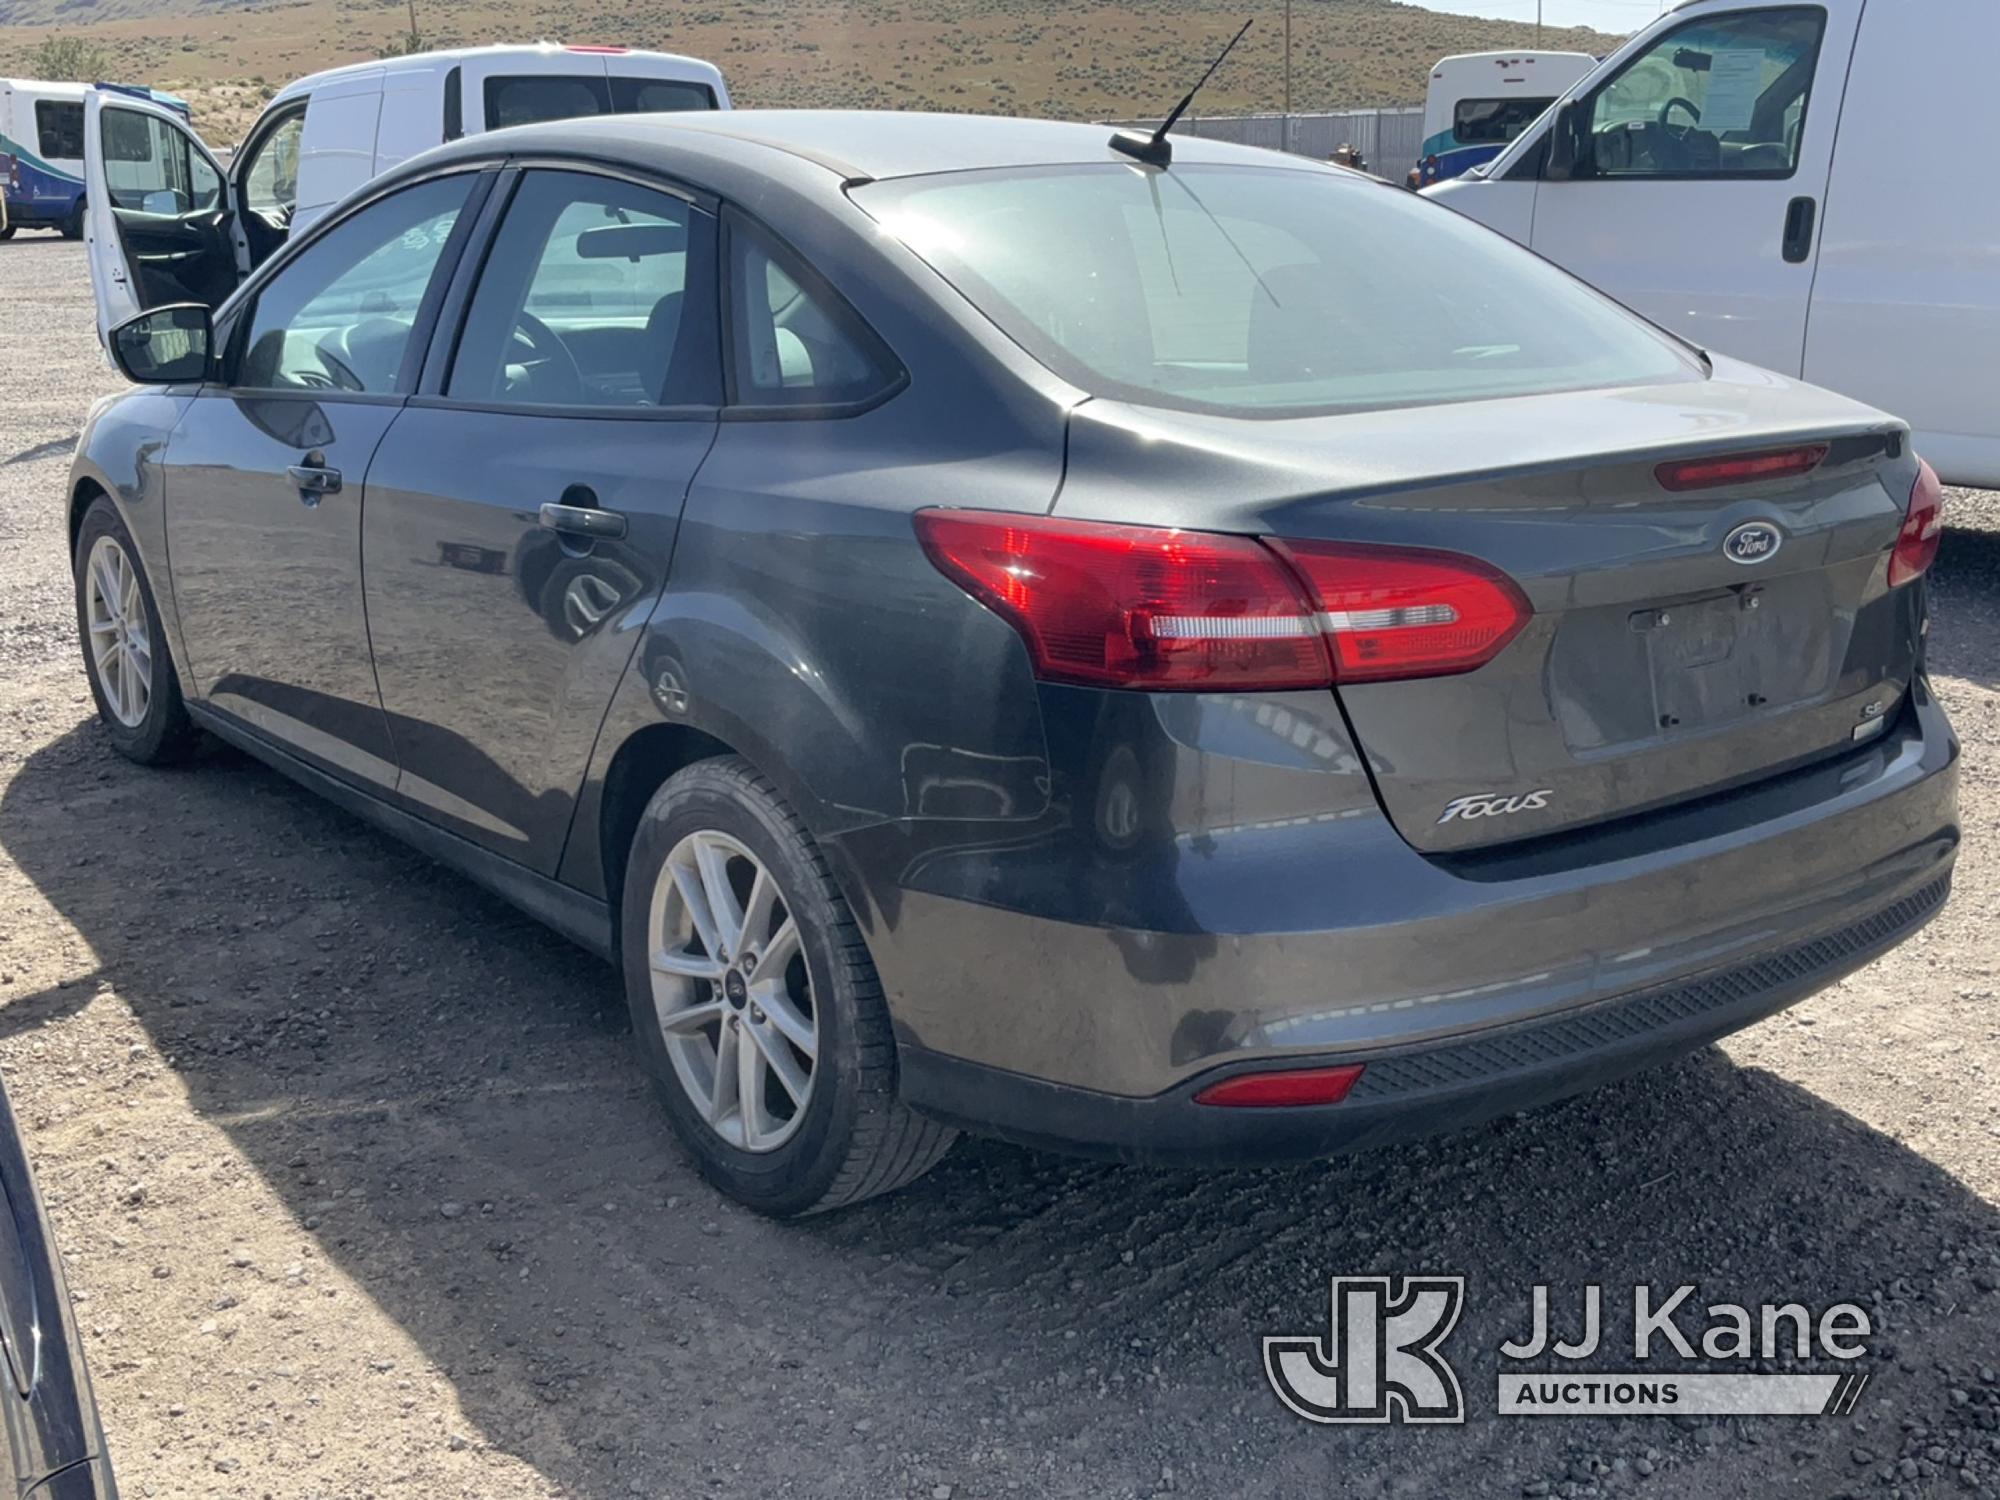 (McCarran, NV) 2018 Ford Focus SE ZXW 4-Door Sedan, Located In Reno Nv. Contact Nathan Tiedt To Prev